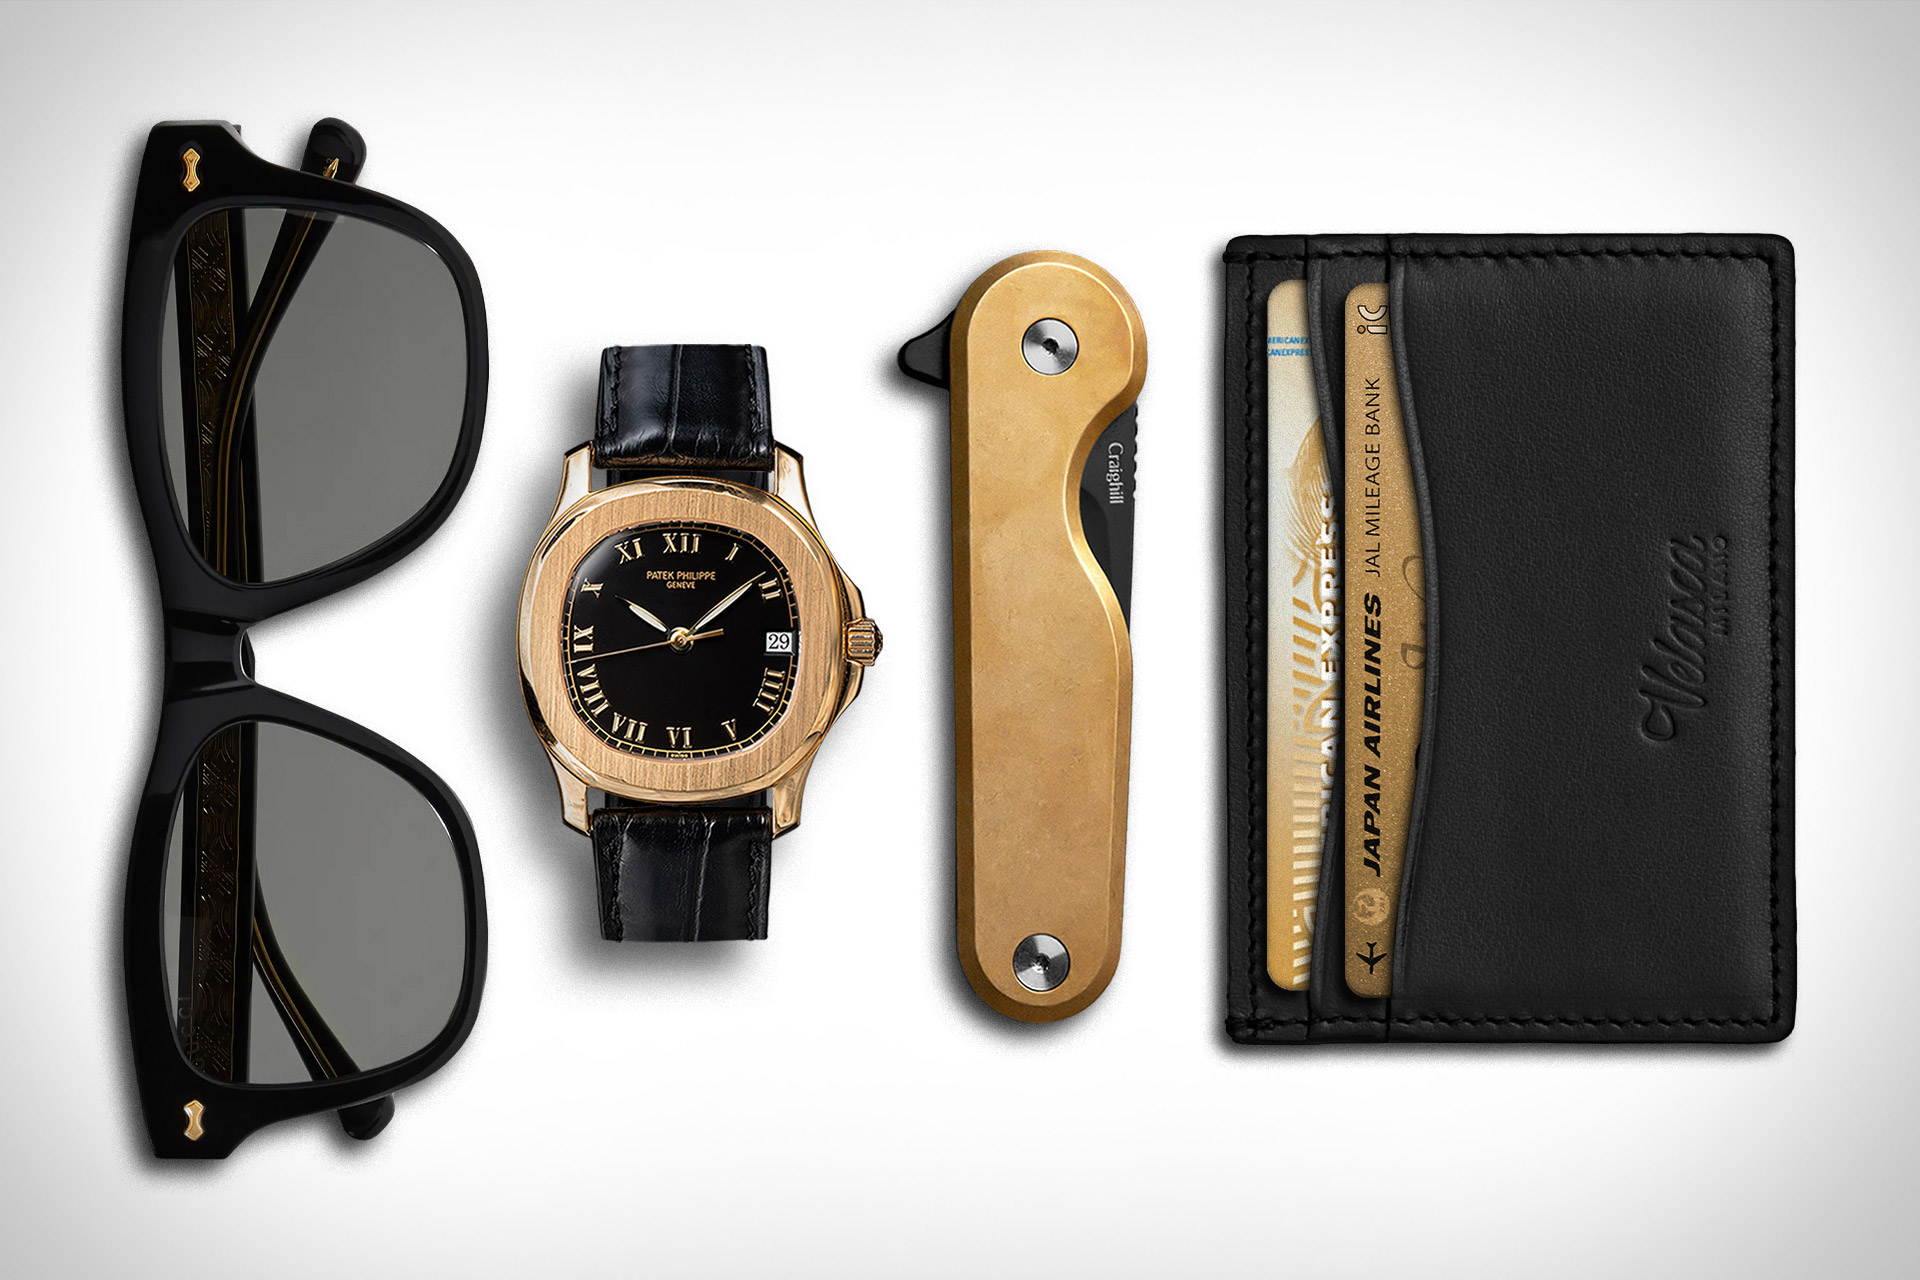 Everyday Carry: Aquanaut | Uncrate, #Everyday #Carry #Aquanaut #Uncrate